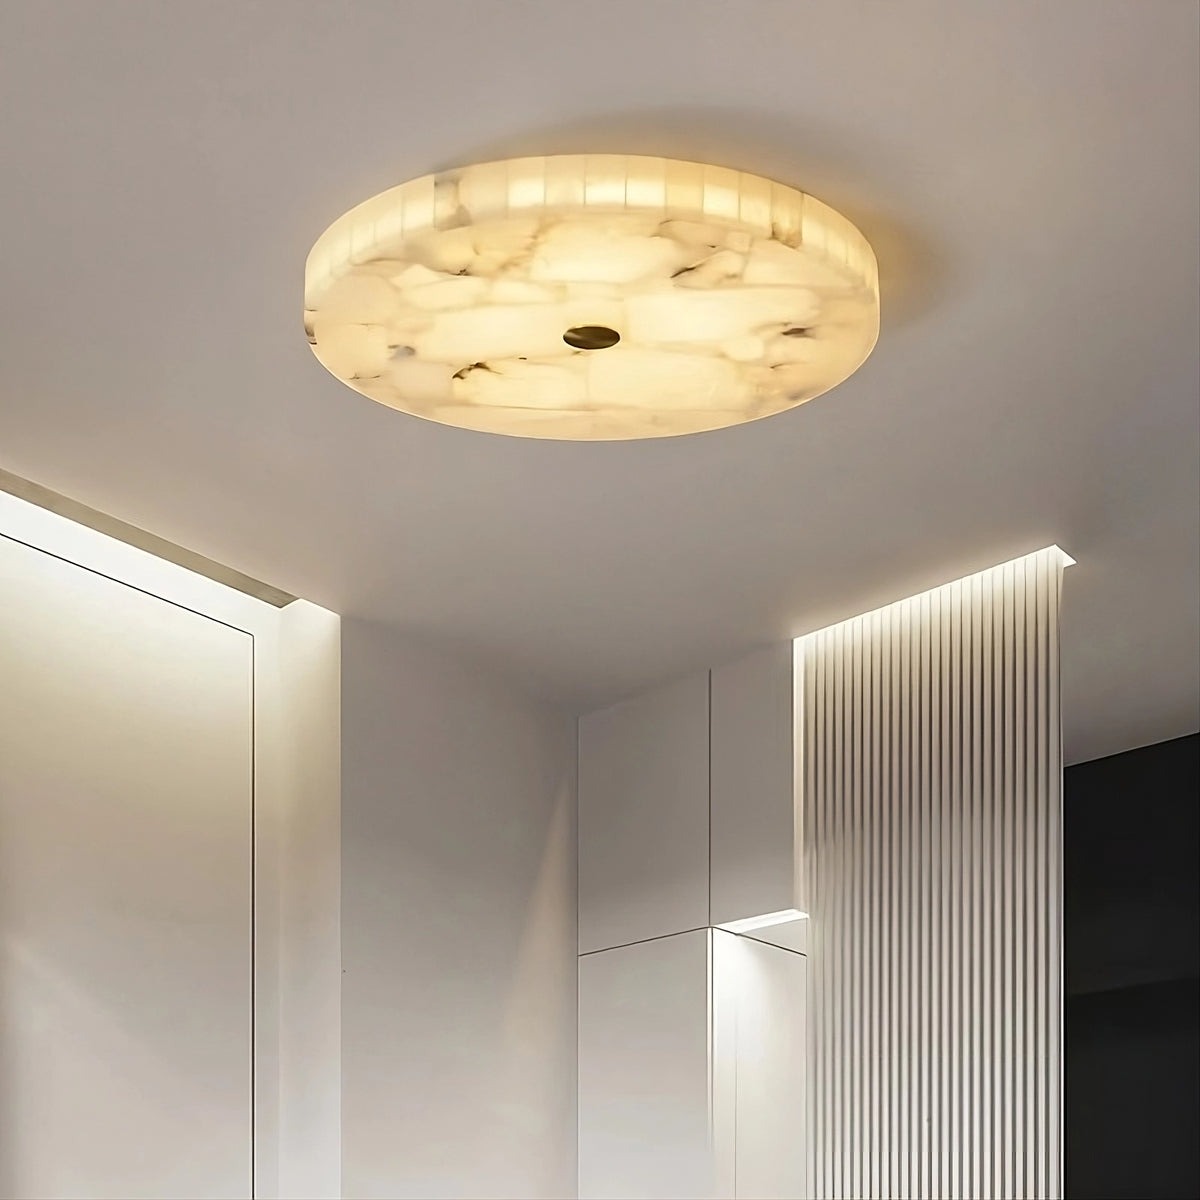 A modern room with a large Moonshade Natural Marble Ceiling Light fixture by Morsale.com that emits a warm, diffused glow. The brass-accented ceiling light has a circular design with a natural marble, translucent appearance. The room features minimalistic, sleek white cabinetry with vertical grooves and walls with clean lines.